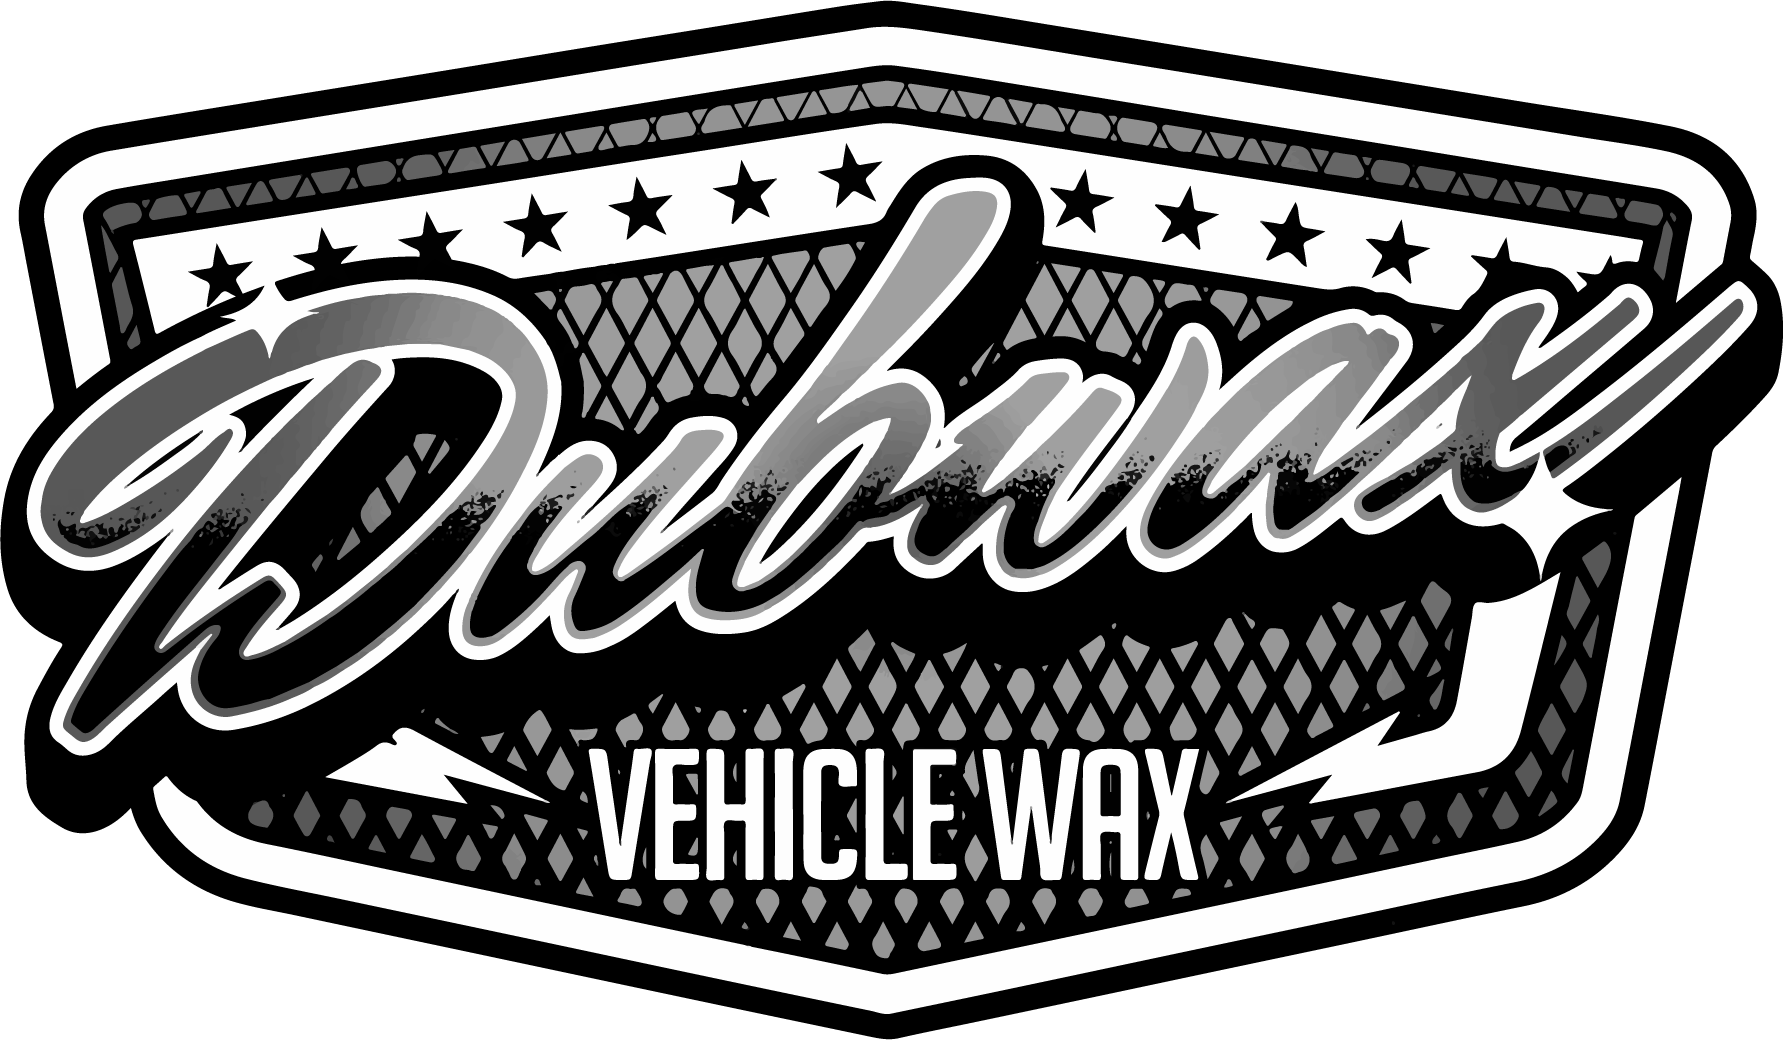 Dubwax™ | Professional Vehicle Wax, Quick Detailer, Cleaning Products & Apparel | Designed for Dubs